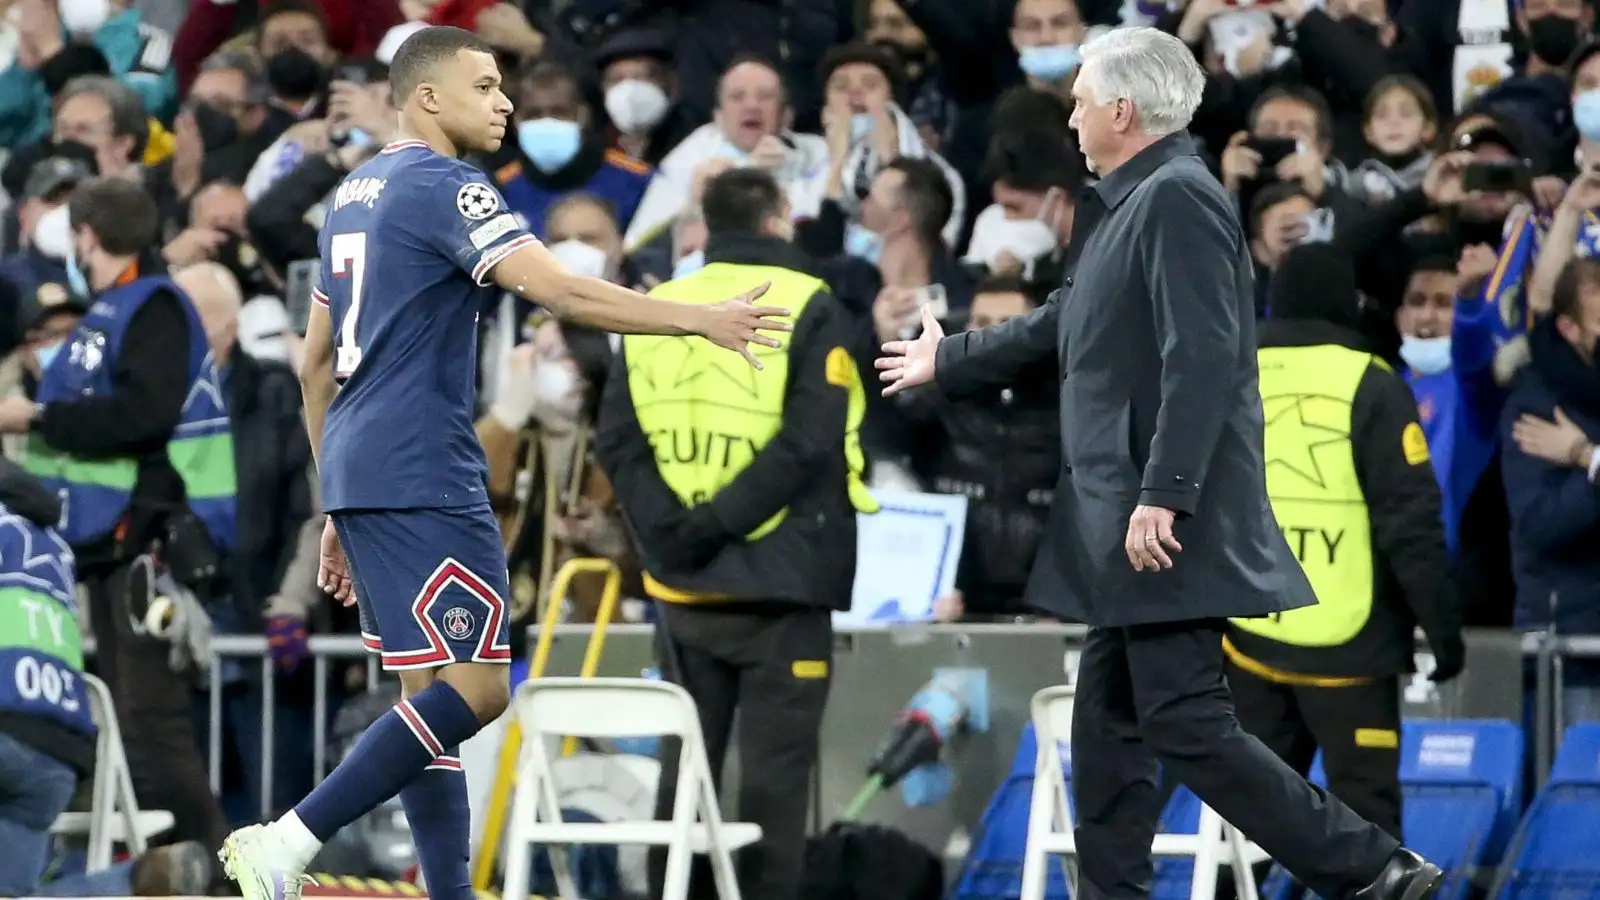 Carlo Ancelotti smoothies hands with Kylian Mbappe after a match.